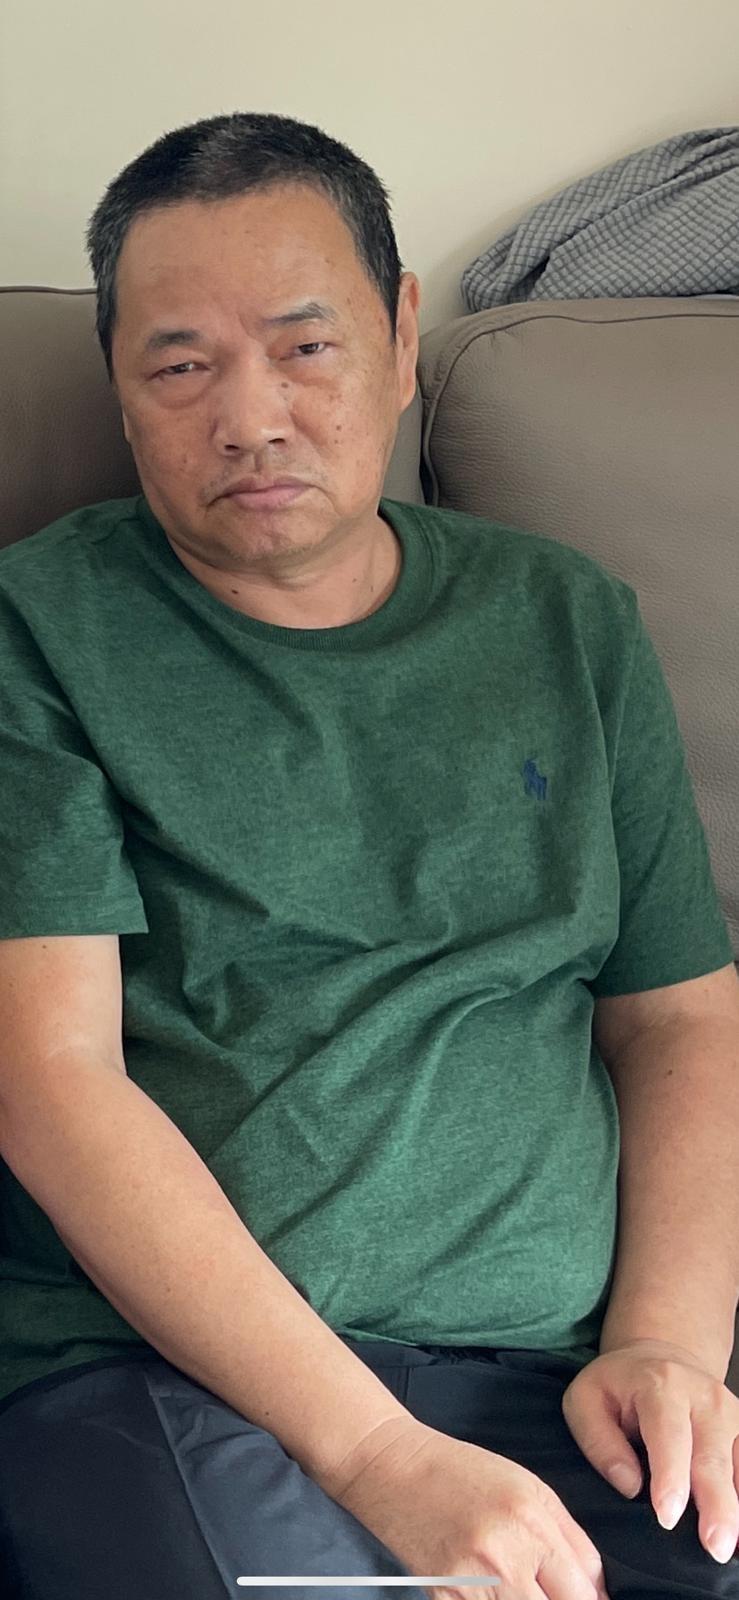 Lee Tim-fat, aged 62, is about 1.7 metres tall, 75 kilograms in weight and of medium build. He has a square face with yellow complexion and short black and white hair. He was last seen wearing a black jacket, black sports trousers and black sports shoes.